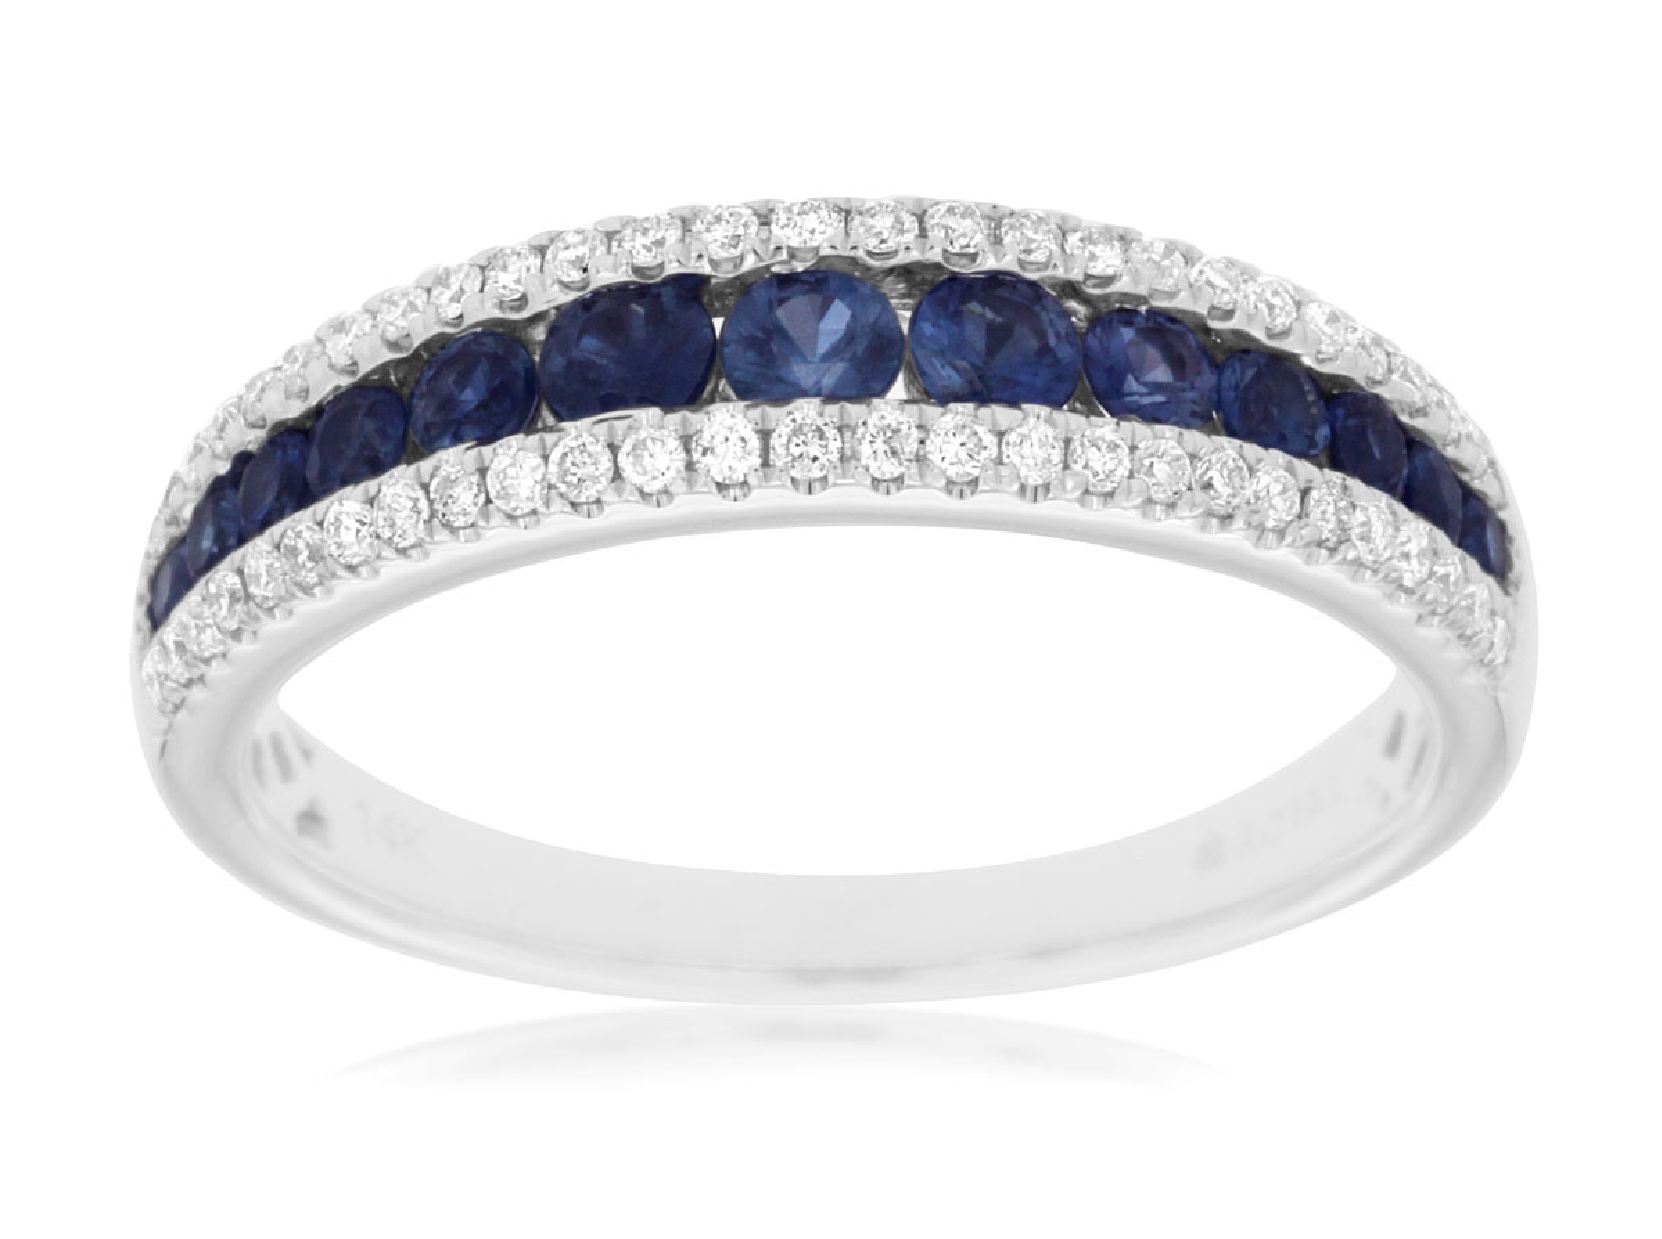 14K White Gold Channel Set Sapphire Ring with Diamond Accents 
Size 7 .22CT Diamonds .65CT Sapphires 
WC8673S